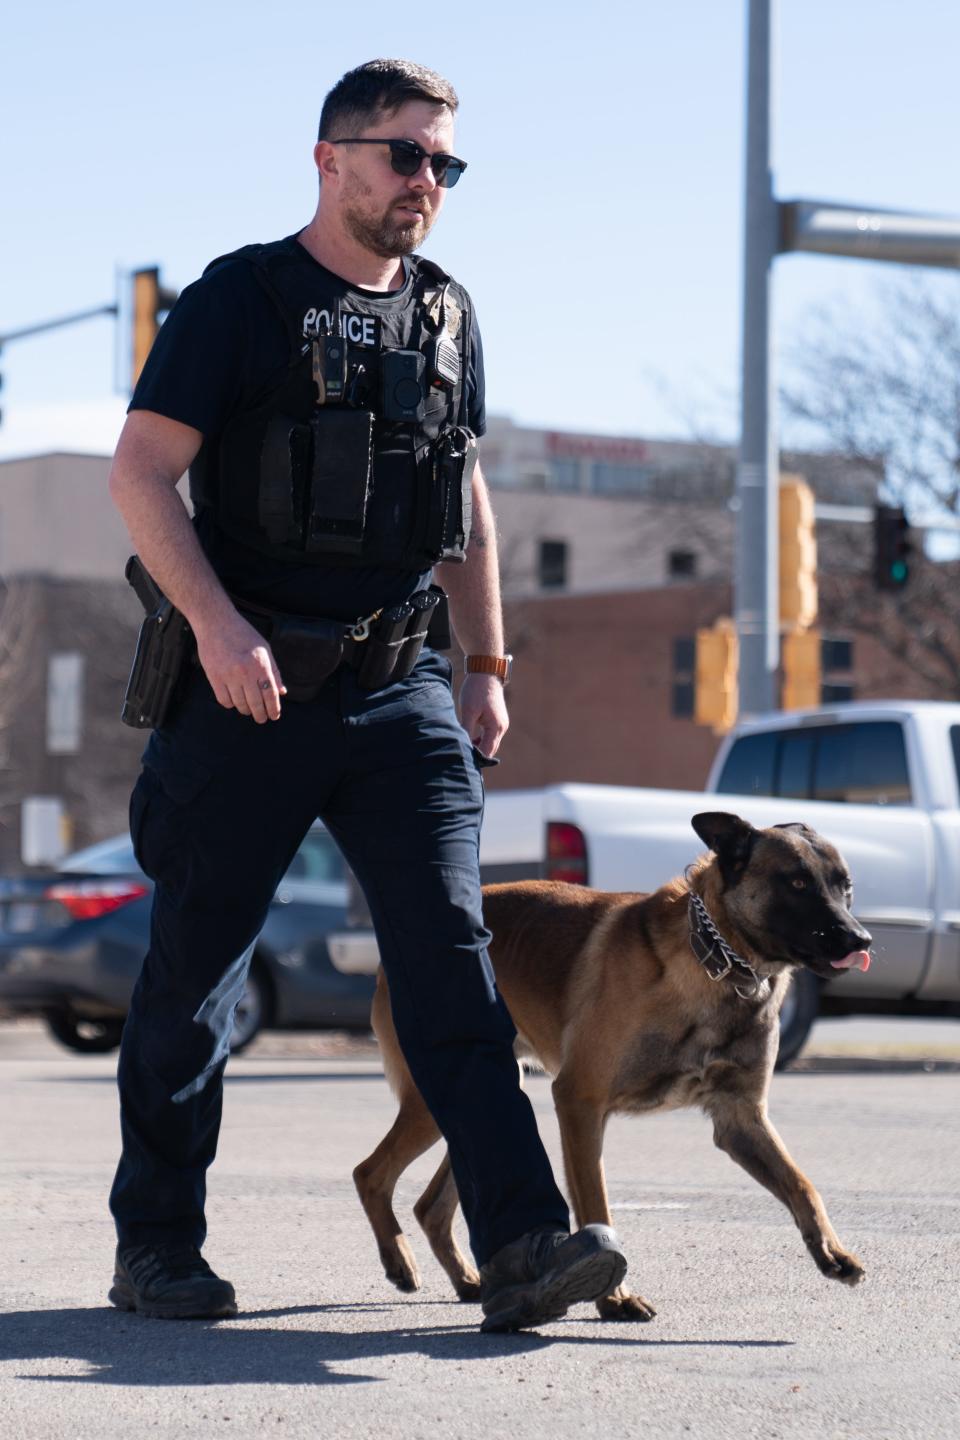 Topeka Police Department officer Devin Viergever works on heeling excersises with his three-year-old Belgium malinois Petey outside of the Law Enforcement Center. Gov. Laura Kelly vetoed a bill that would increase penalties for injuring or killing a police dog.